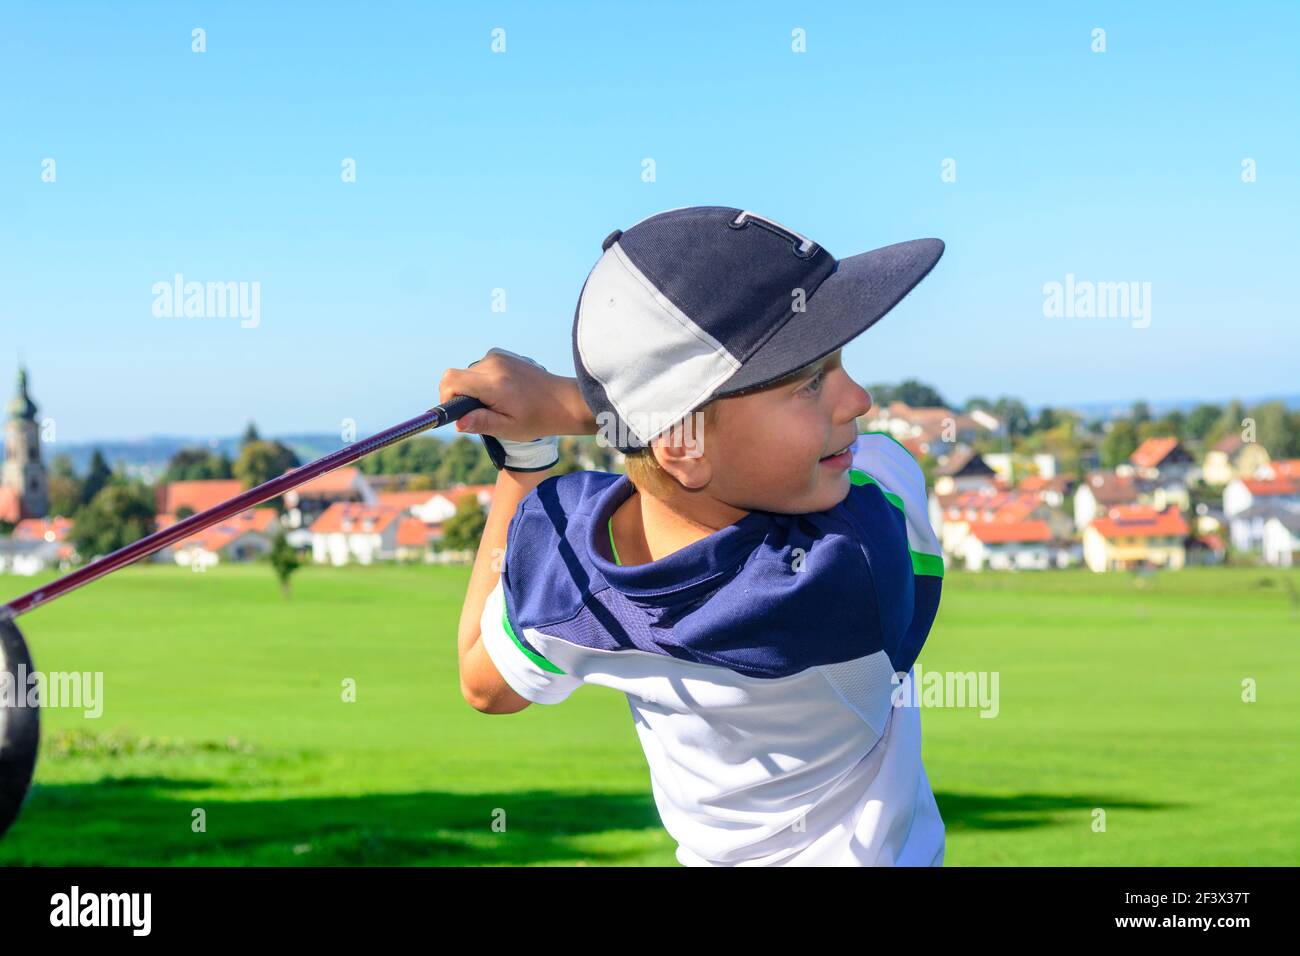 Talented young golfers playing ambitiously on a golf course. Stock Photo